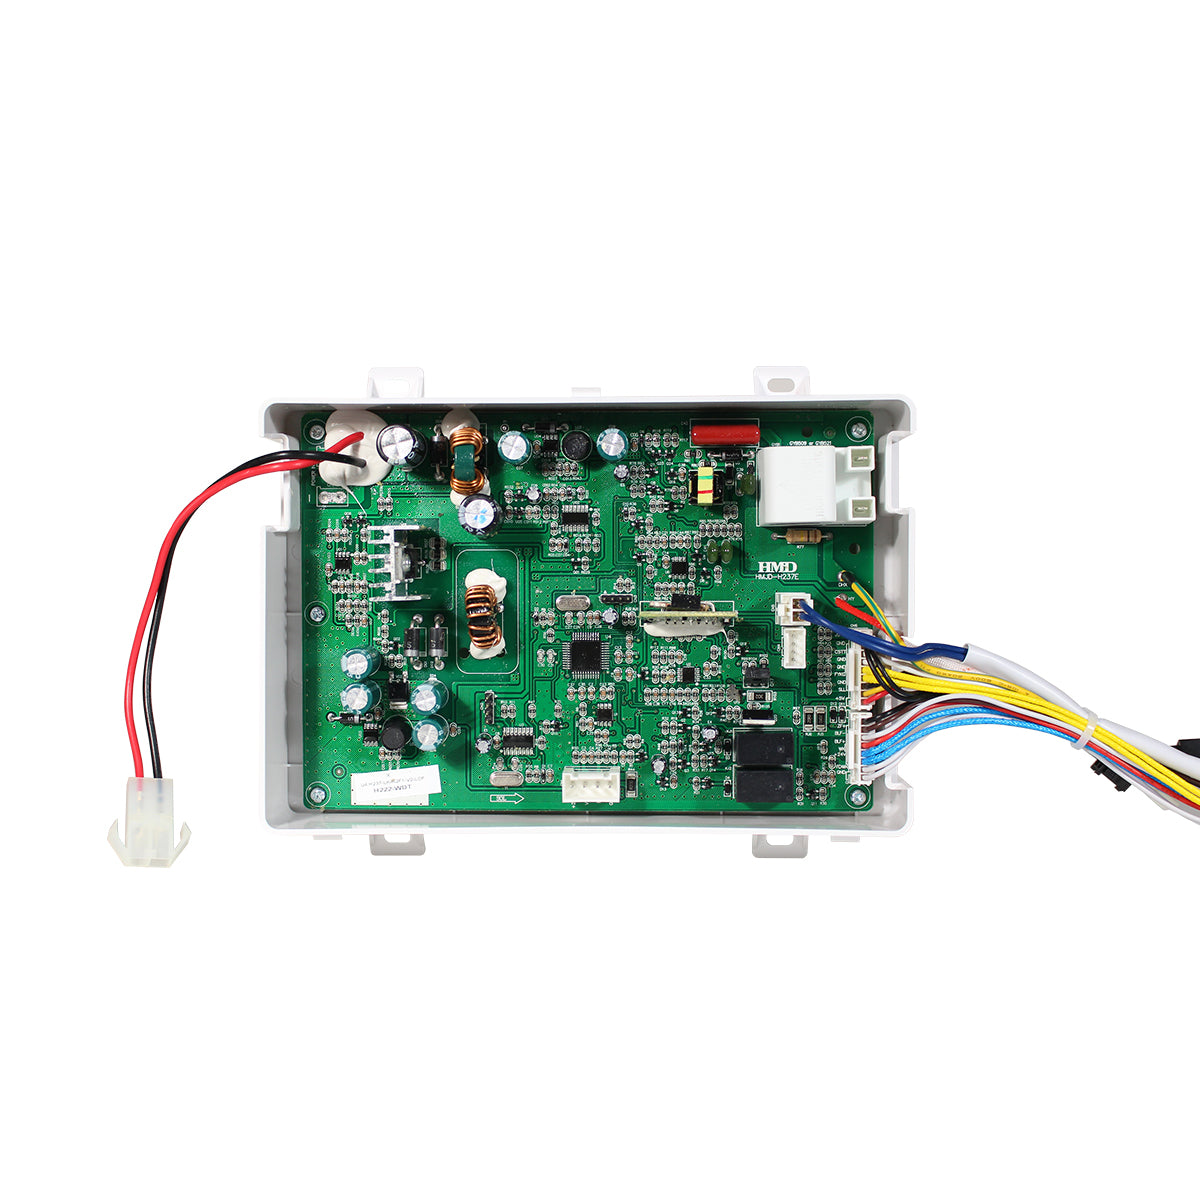 Main Controller (for RV Water Heater)